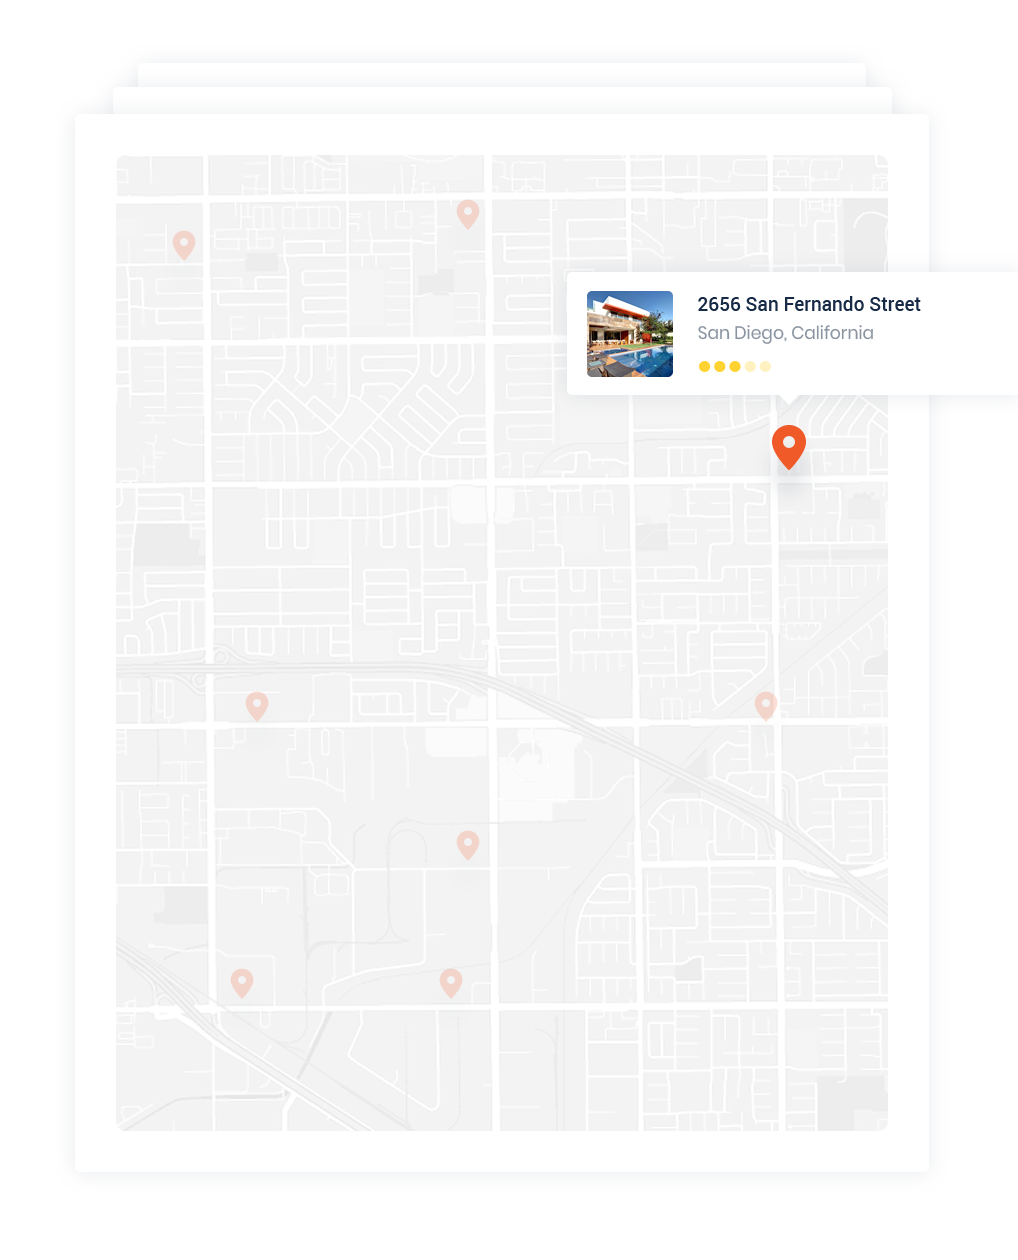 Browse your real estate by list or by map view. Listings dynamically updated and always in real-time.